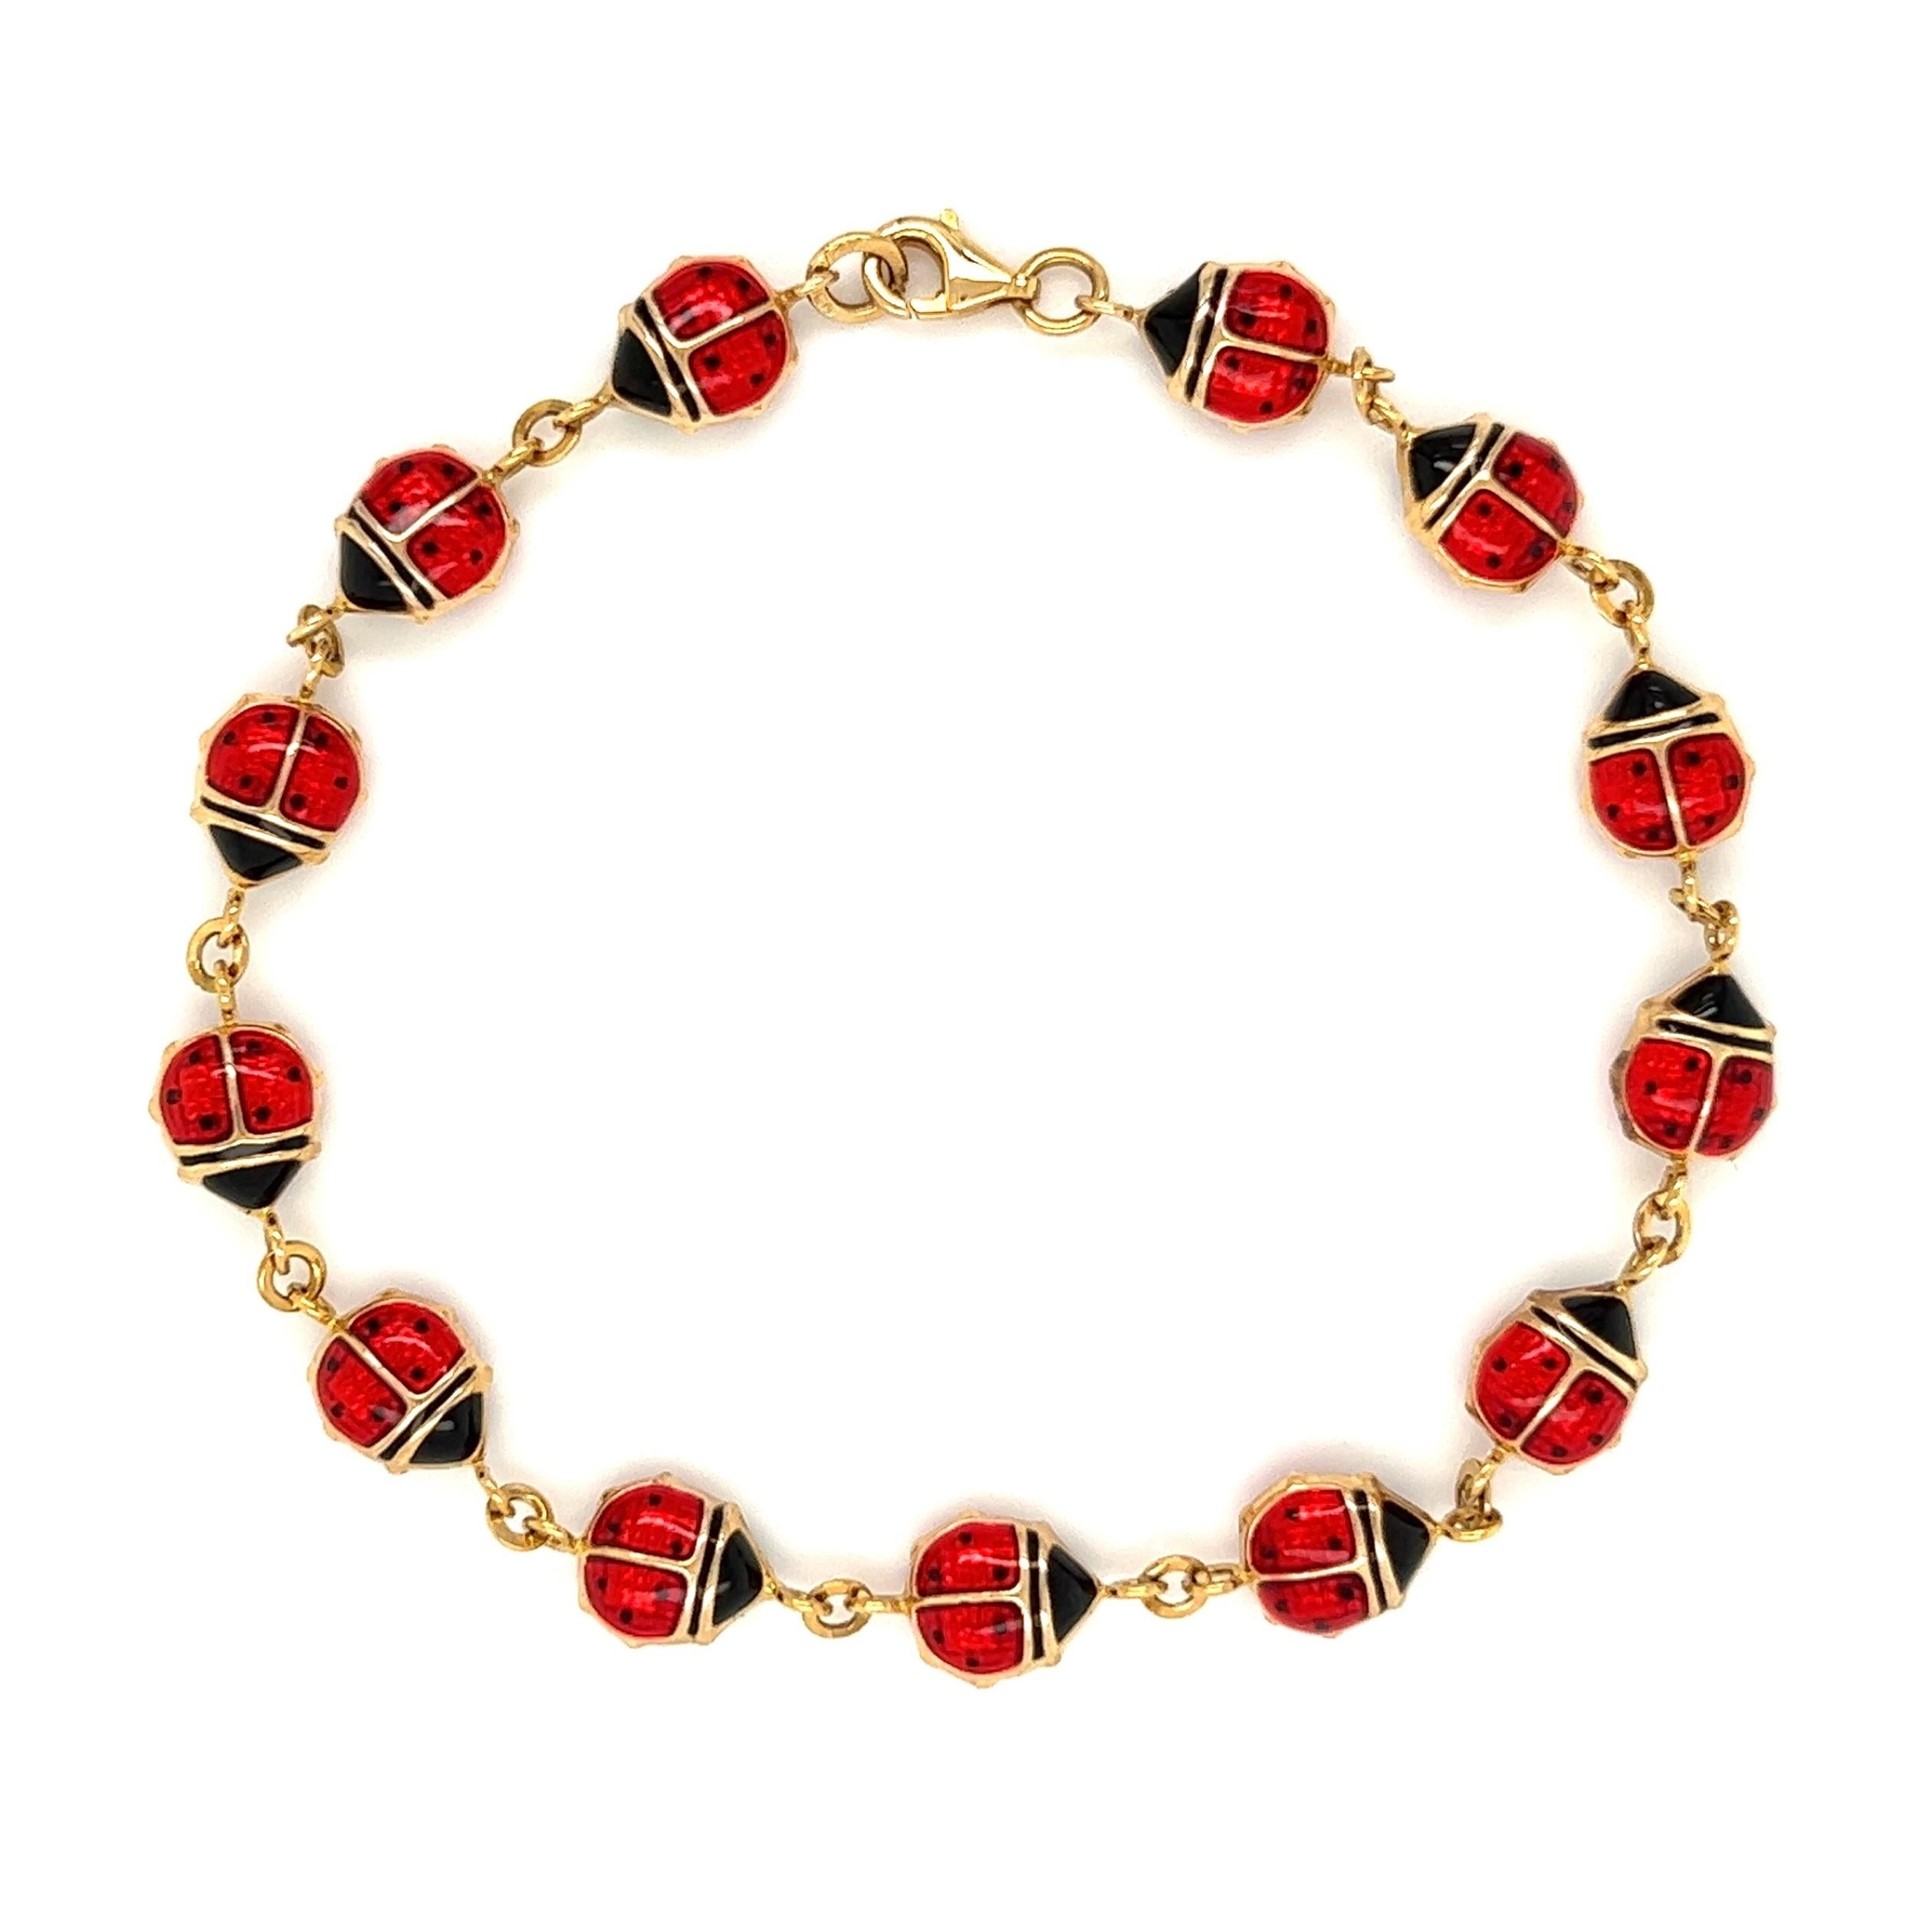 Simply Beautiful! Red and Black Enamel Lady Bugs Coccinelles 14K Yellow Gold Link Bracelet. Measuring approx. 7.75” long. More Beautiful in real time! Sure to be admired and bring you Good Luck…A piece you’ll turn to time and again! 
